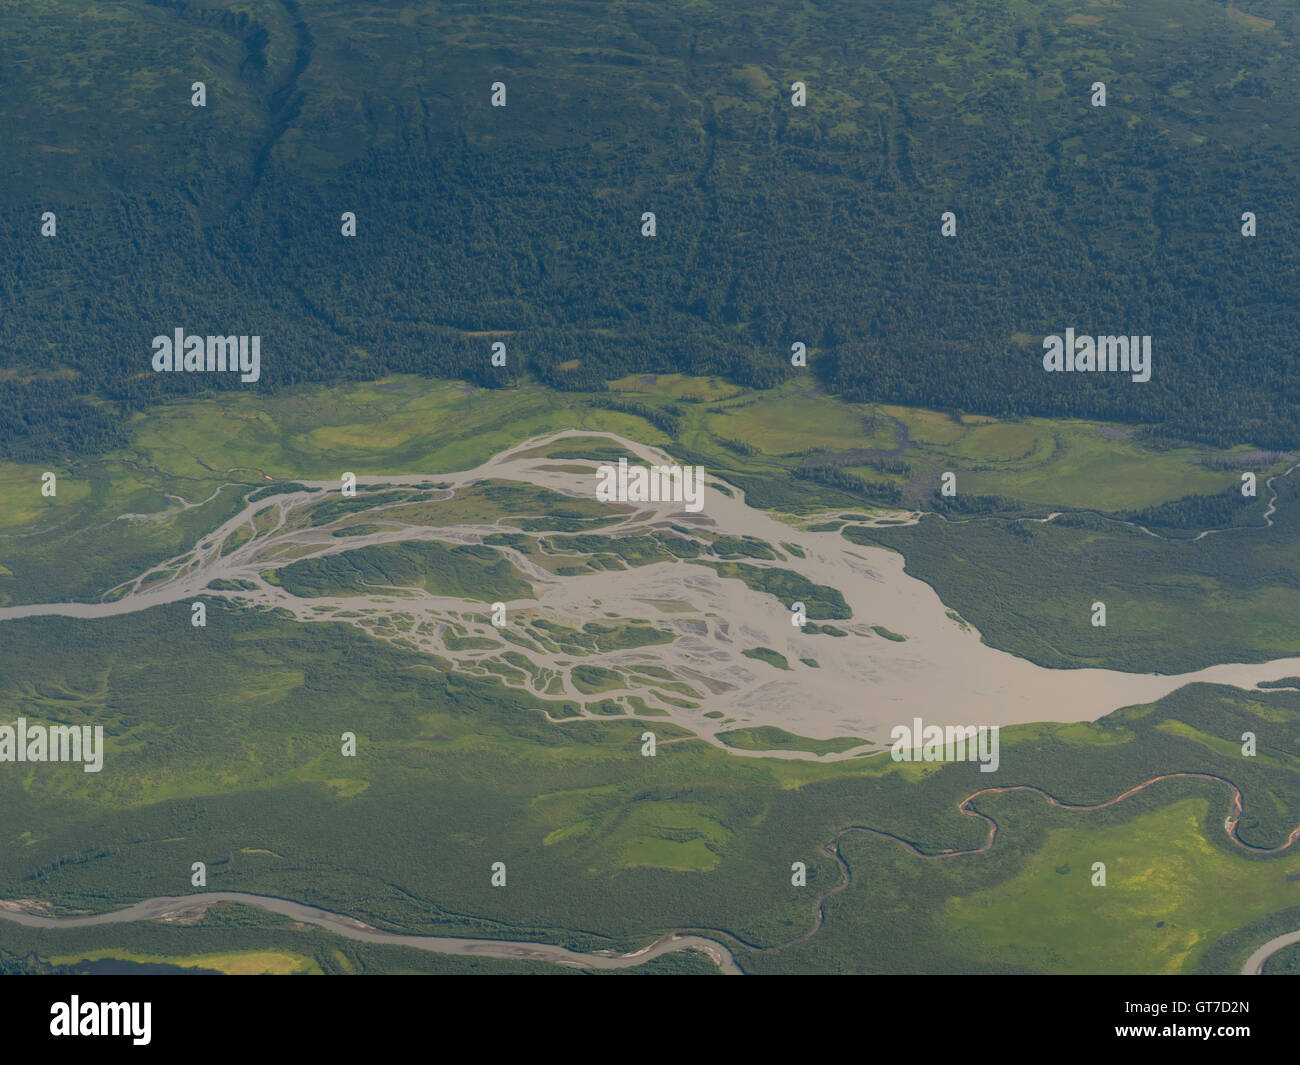 Aerial view of a braided river on a flight from Talkeetna to Denali; likely the Tokositna River. Stock Photo